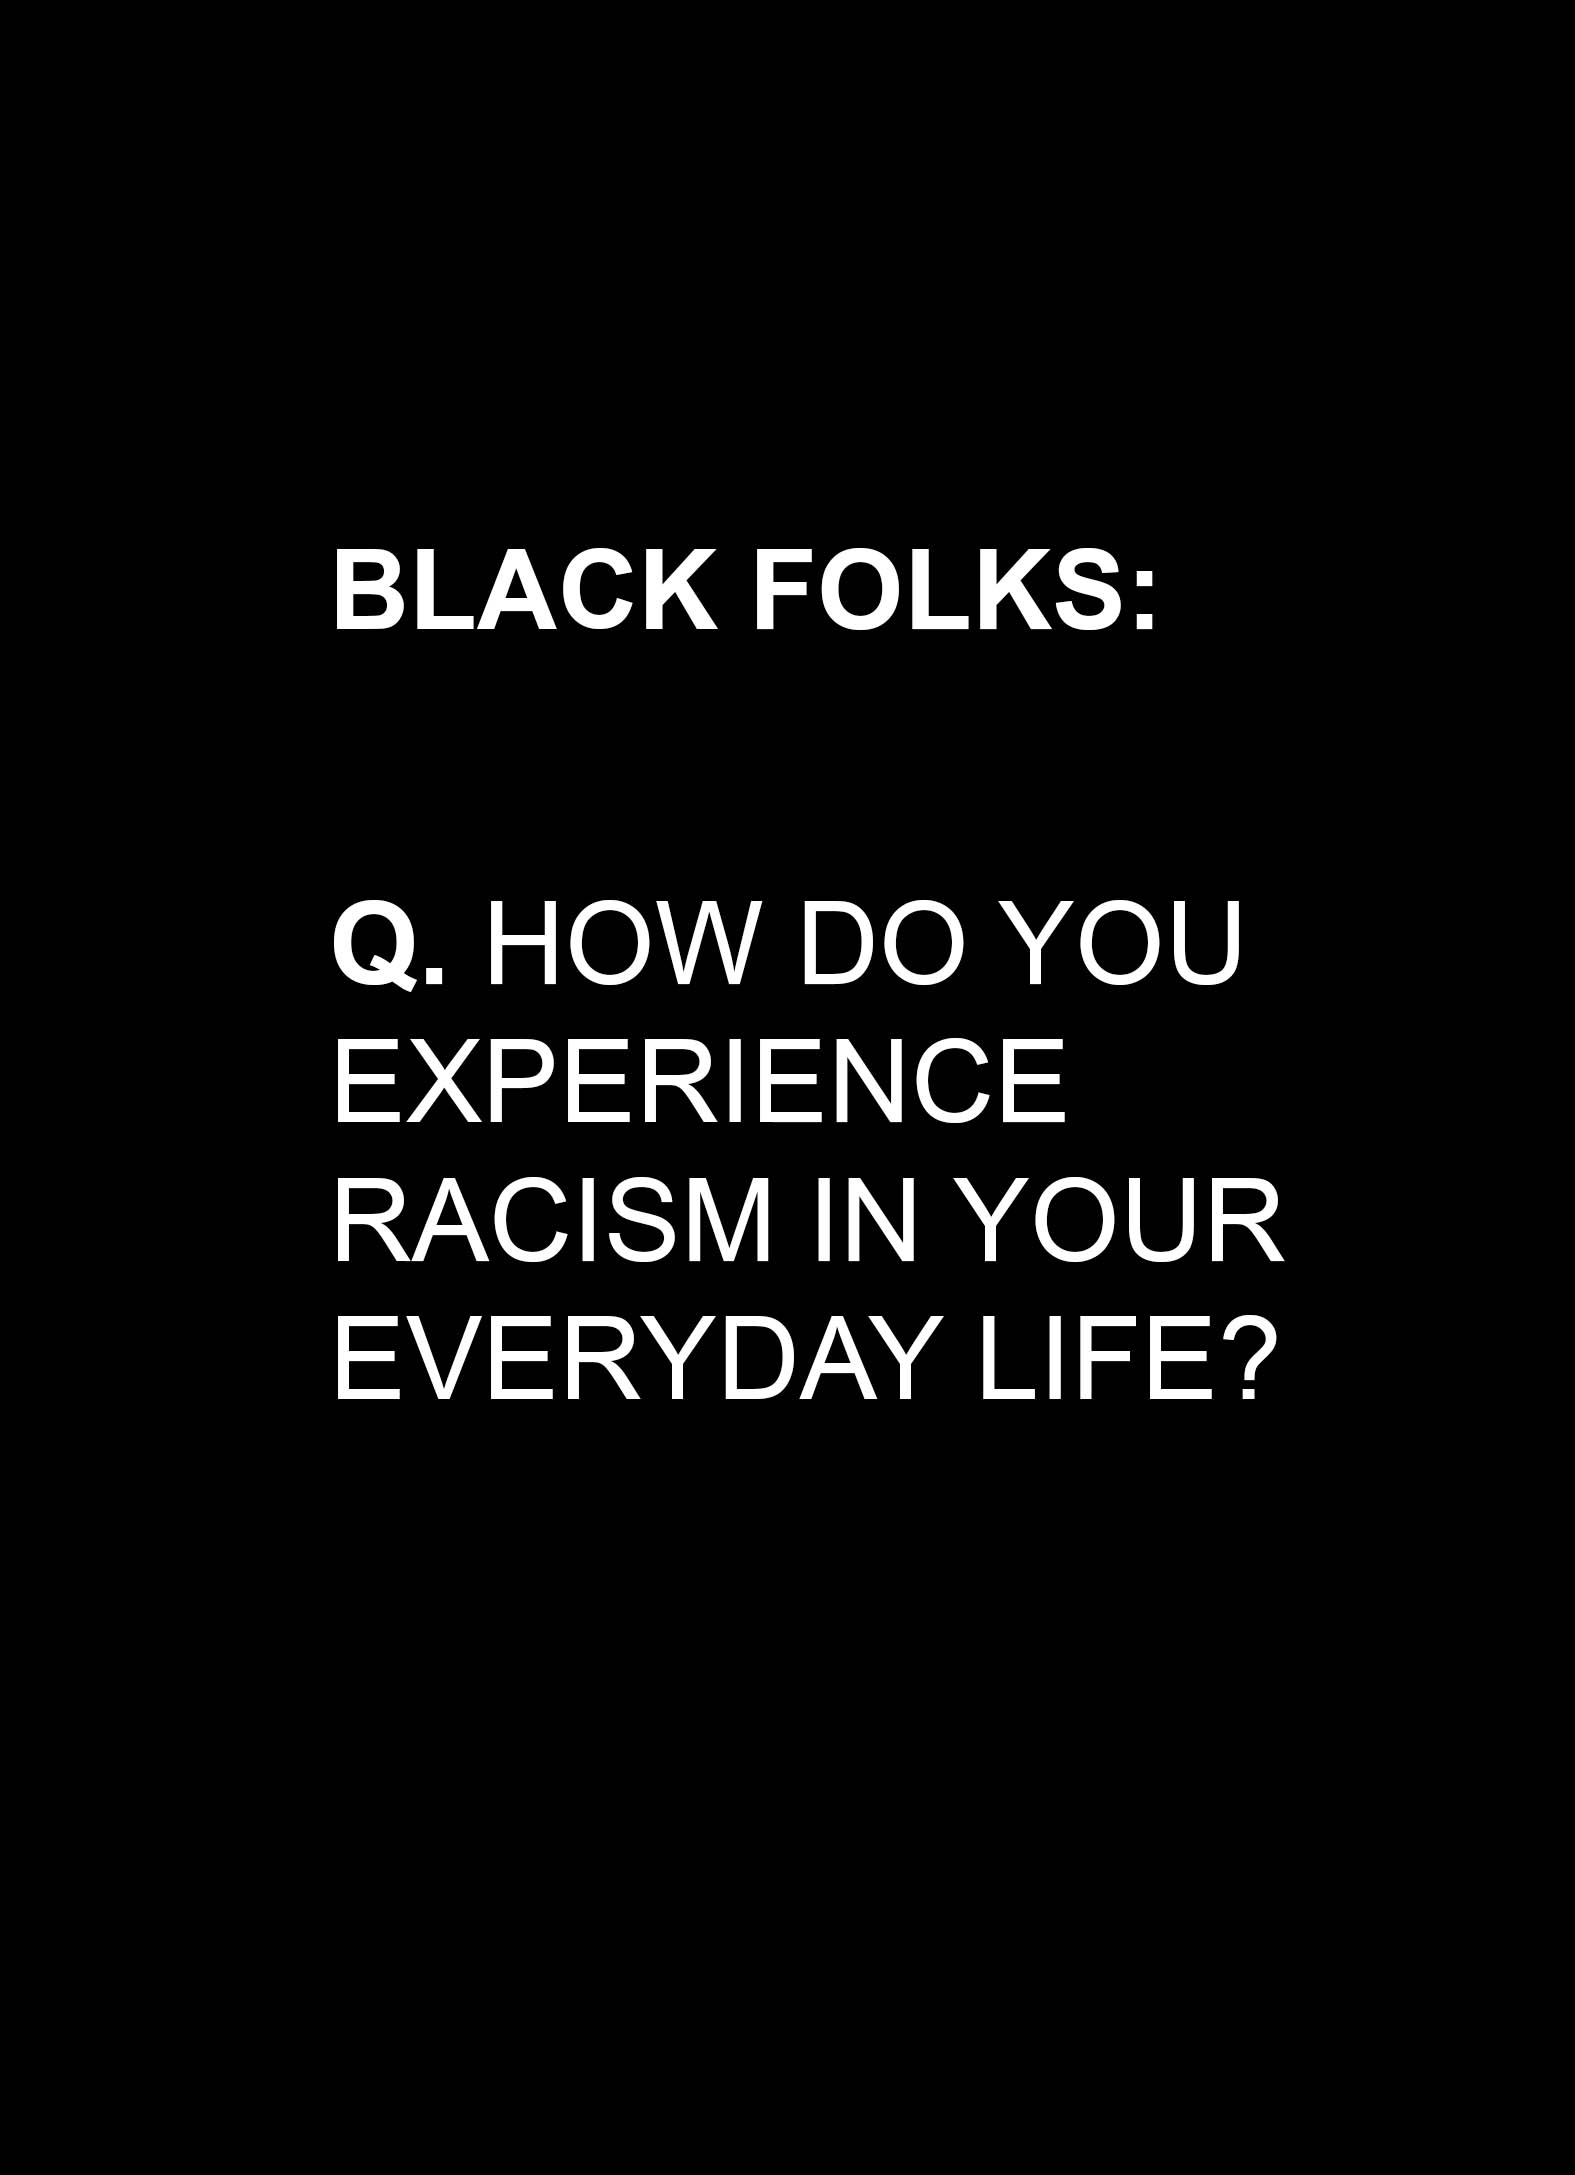 Black folks: Q. How do you experience racism in your everyday life?